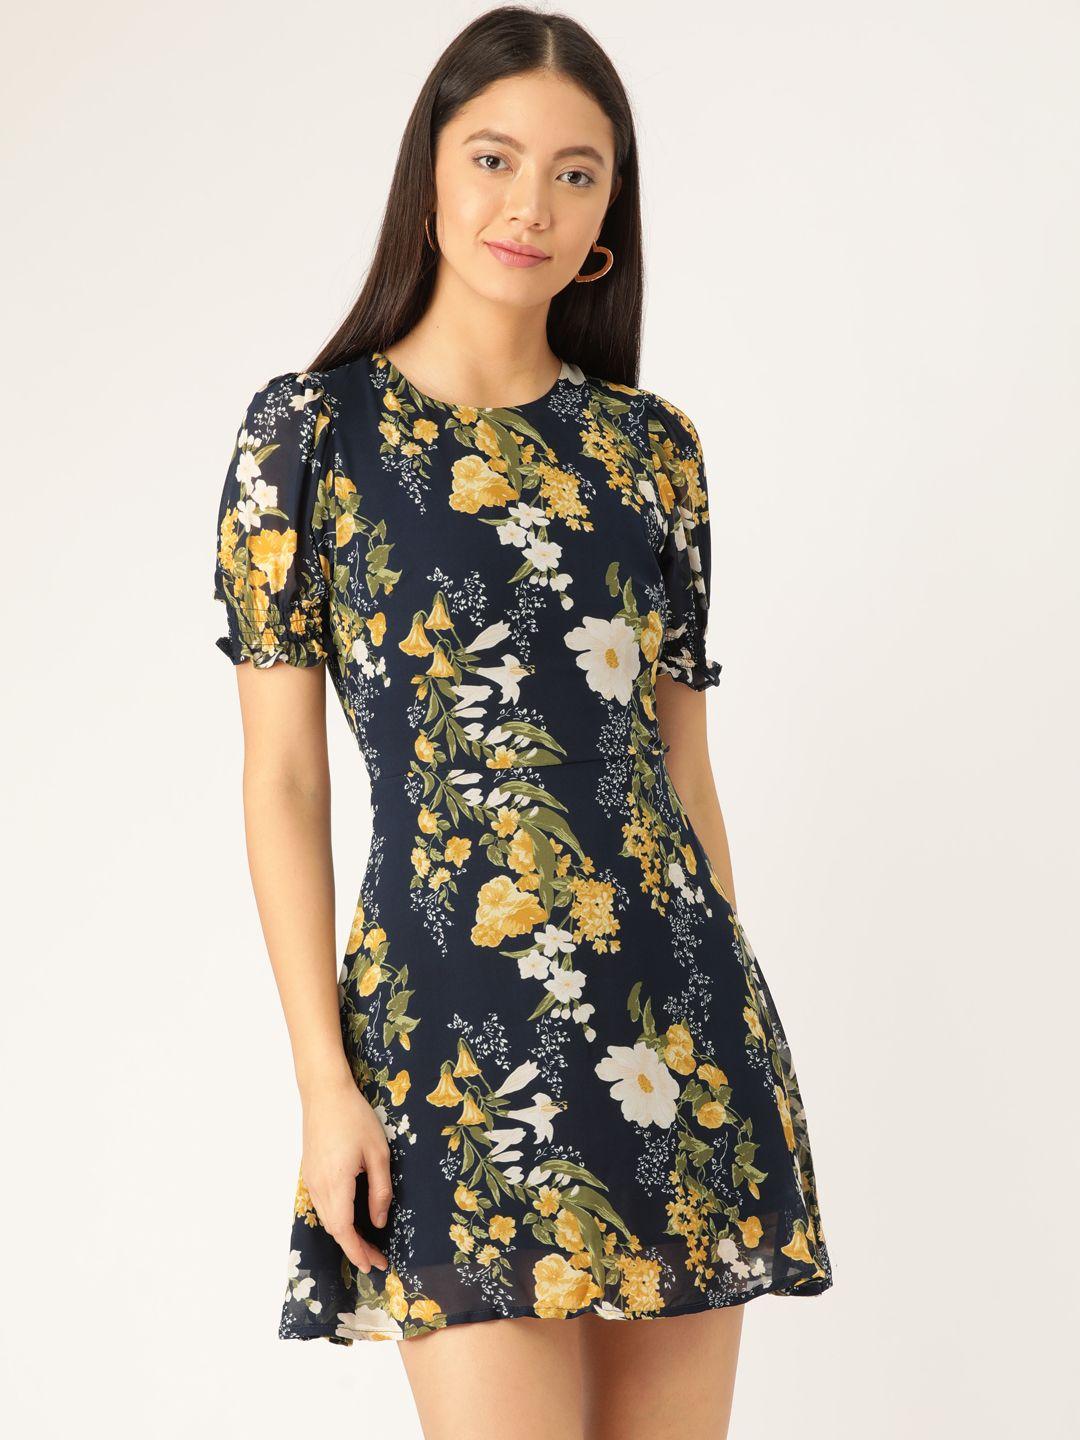 anvi-be-yourself-women-navy-blue-&-yellow-floral-printed-semi-sheer-a-line-dress